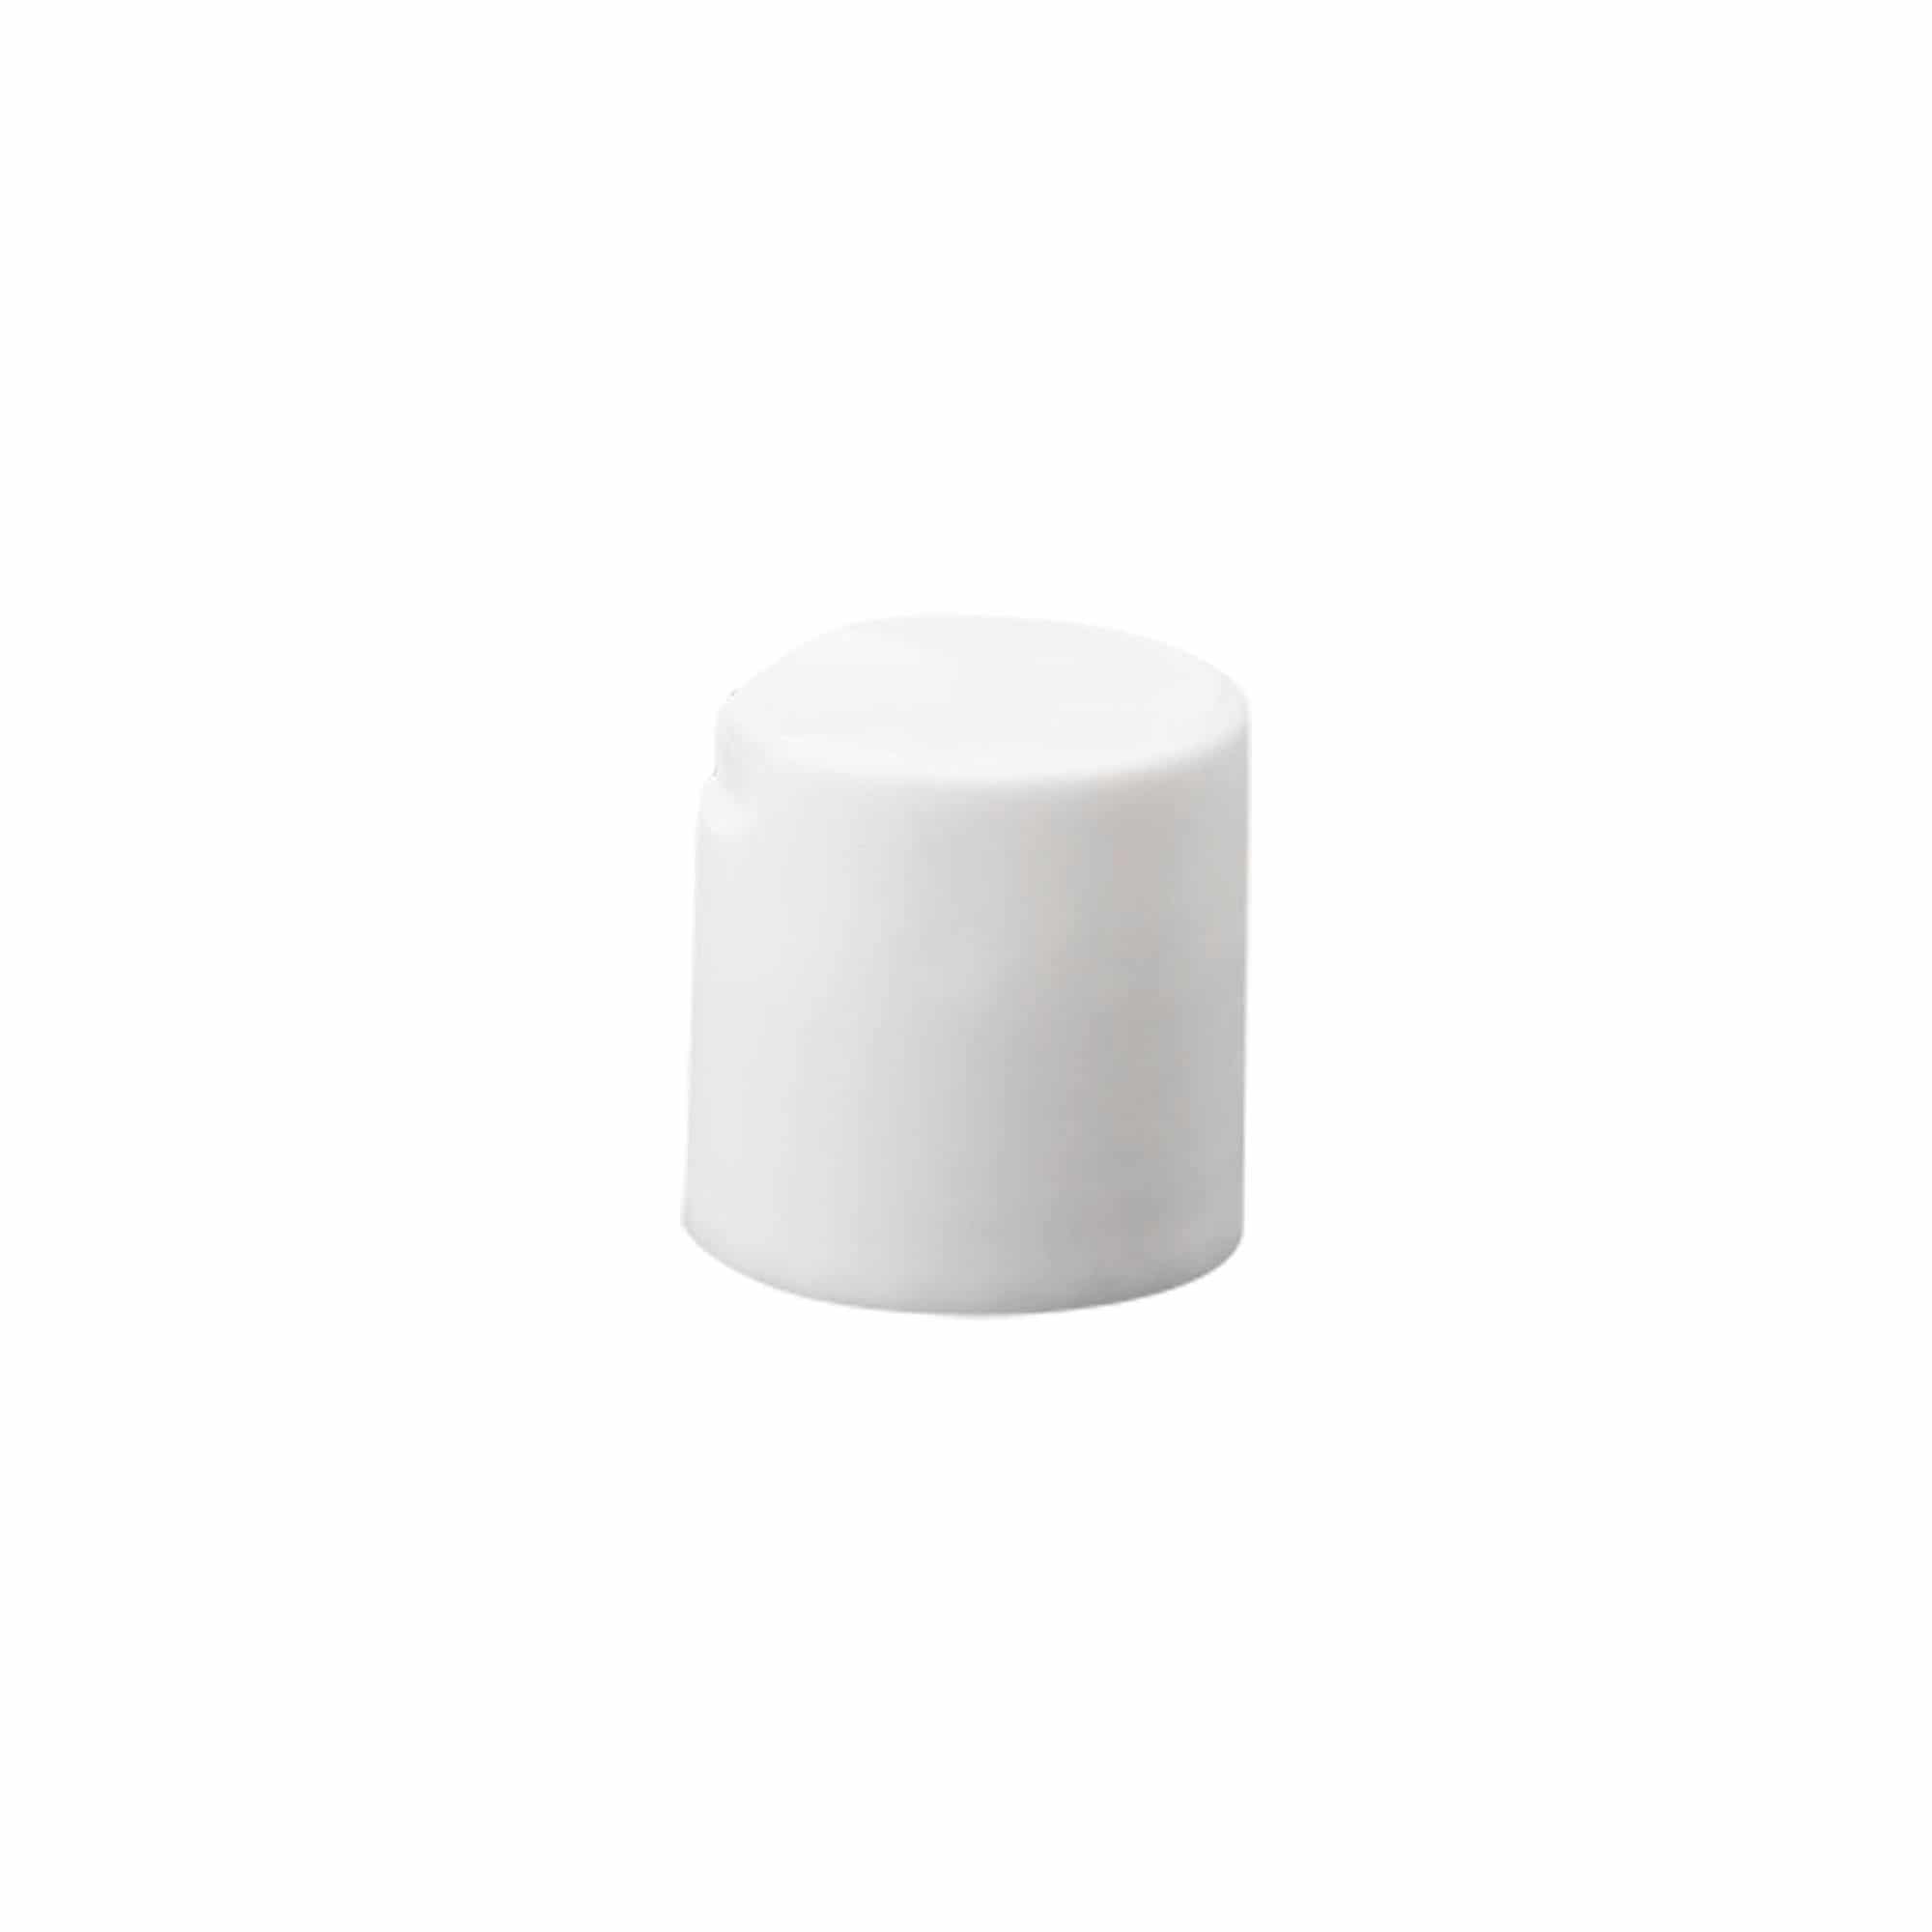 Screw cap with disc top, PP plastic, white, for opening: GPI 24/410